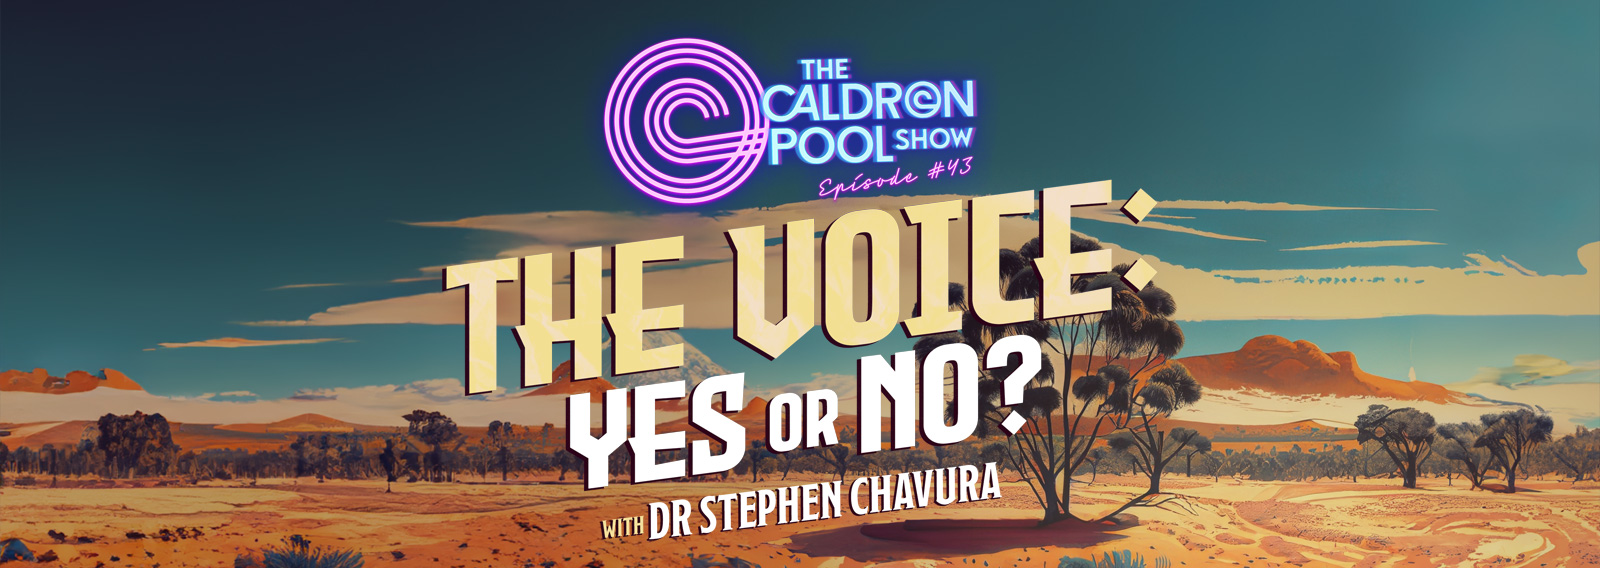 The Caldron Pool Show: #43 – The Voice: Yes or No?